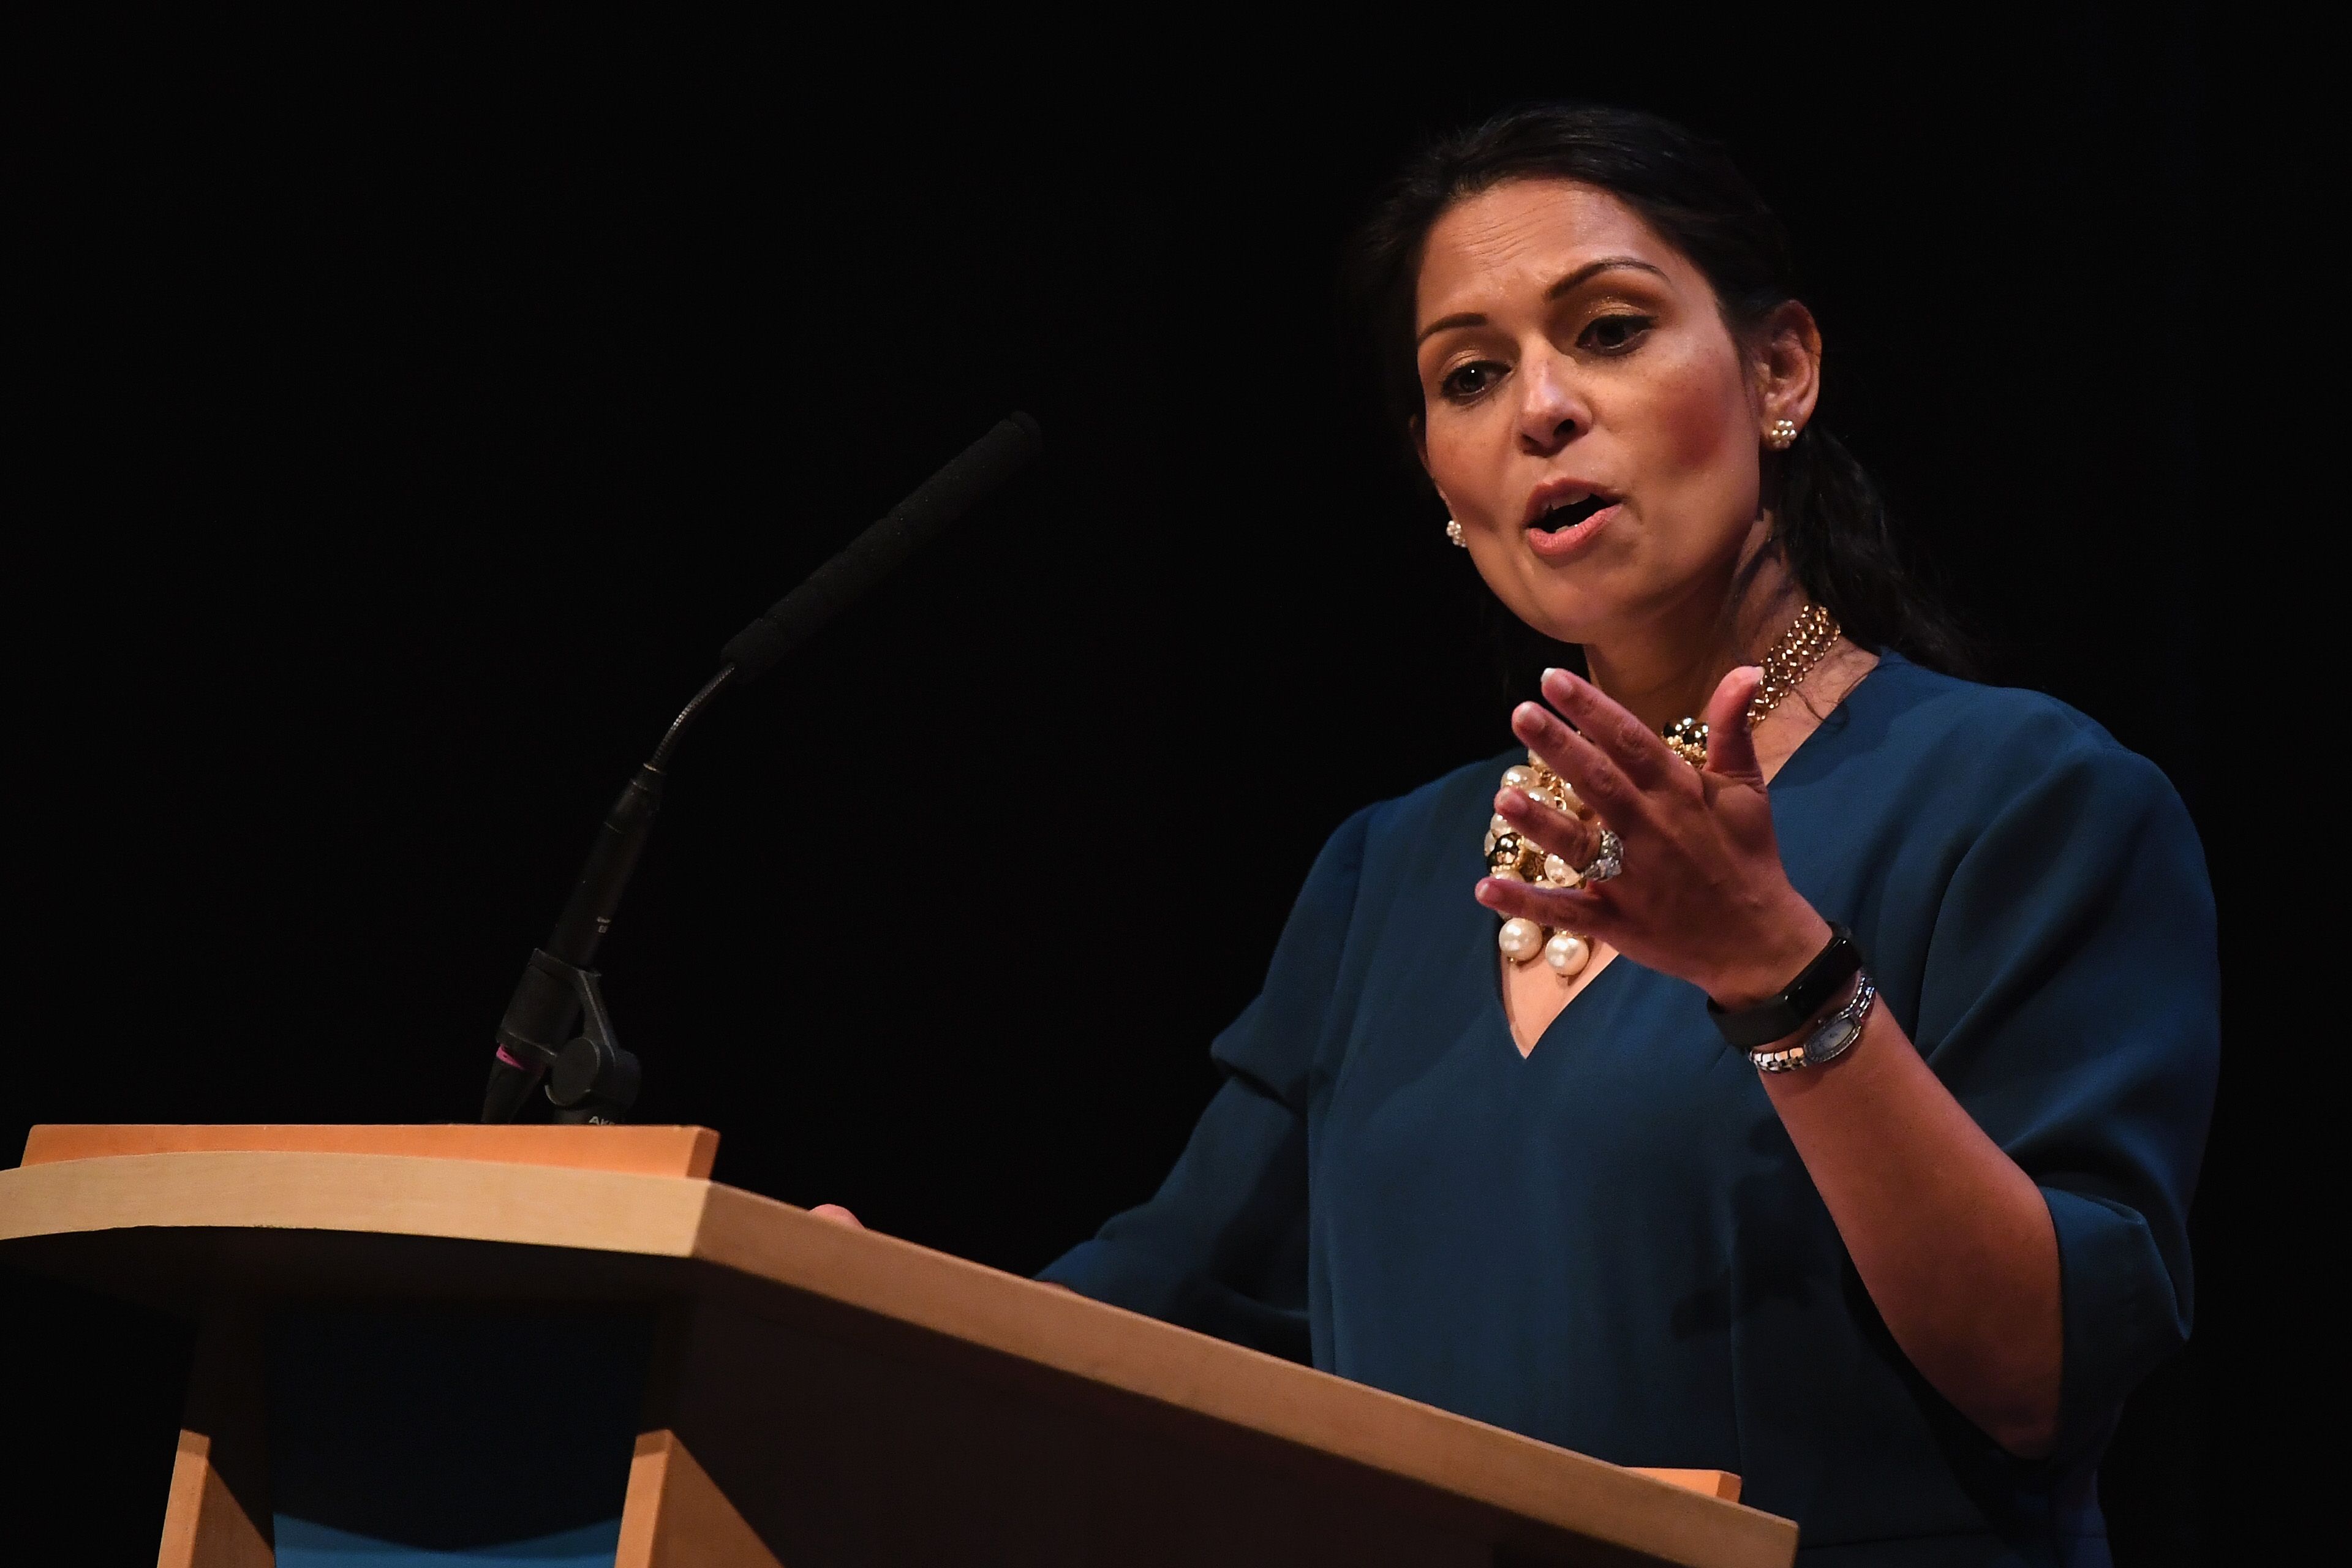 BIRMINGHAM, ENGLAND - SEPTEMBER 30: Secretary of State for International Development Priti Patel speaks during the annual Conservative Party Conference on September 30, 2018 in Birmingham, England. The Conservative Party Conference 2018 is taking place at Birmingham's International Convention Centre (ICC) from September 30 to October 3. (Photo by Jeff J Mitchell/Getty Images)